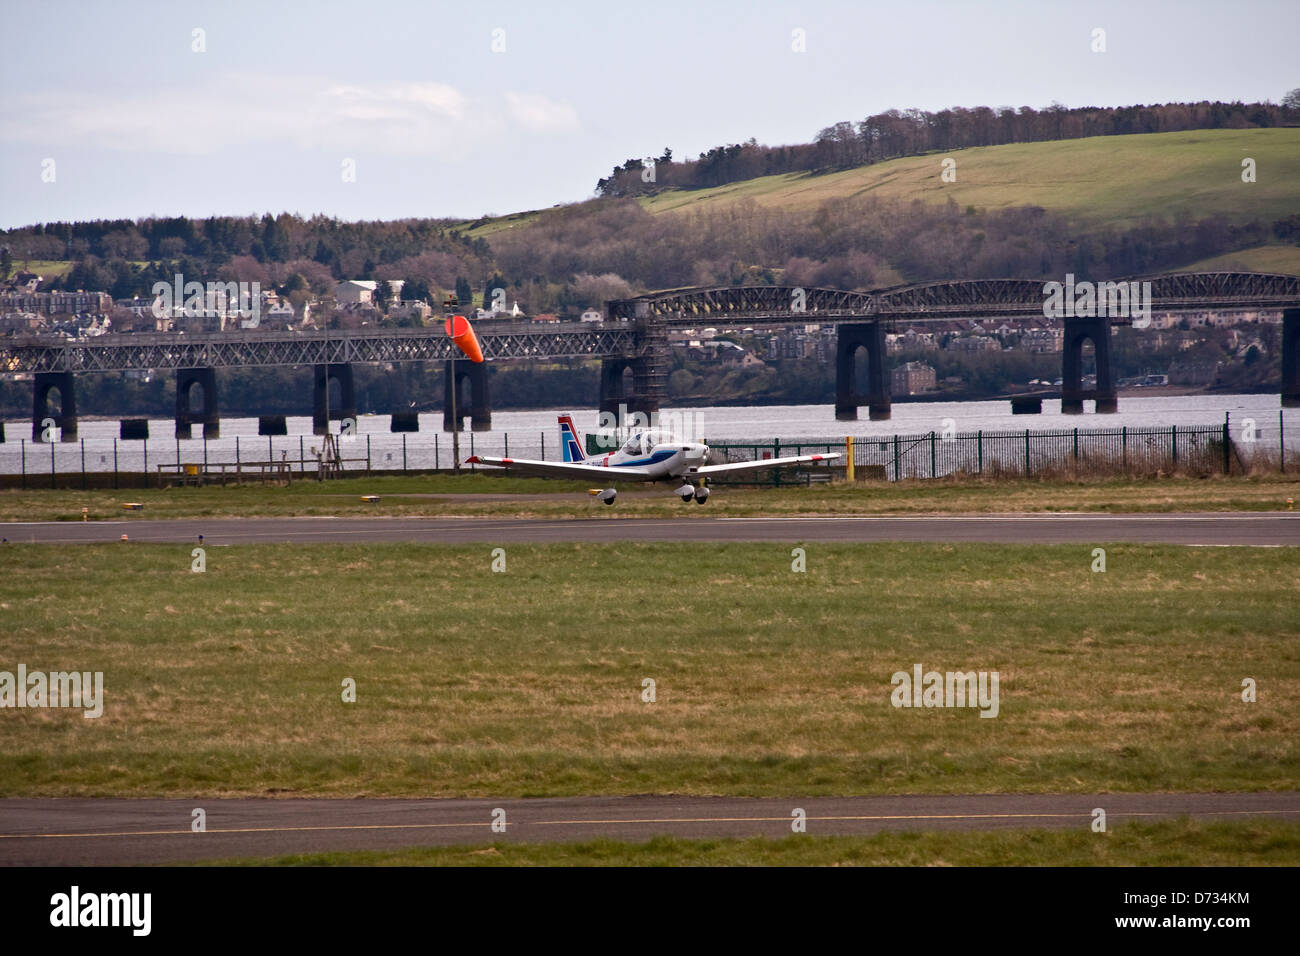 A German aircraft of the Tayside Aviation Grob G115 Tutor T.1 / Heron G-BVHG taking off from the Runway at Dundee Airport ,UK Stock Photo